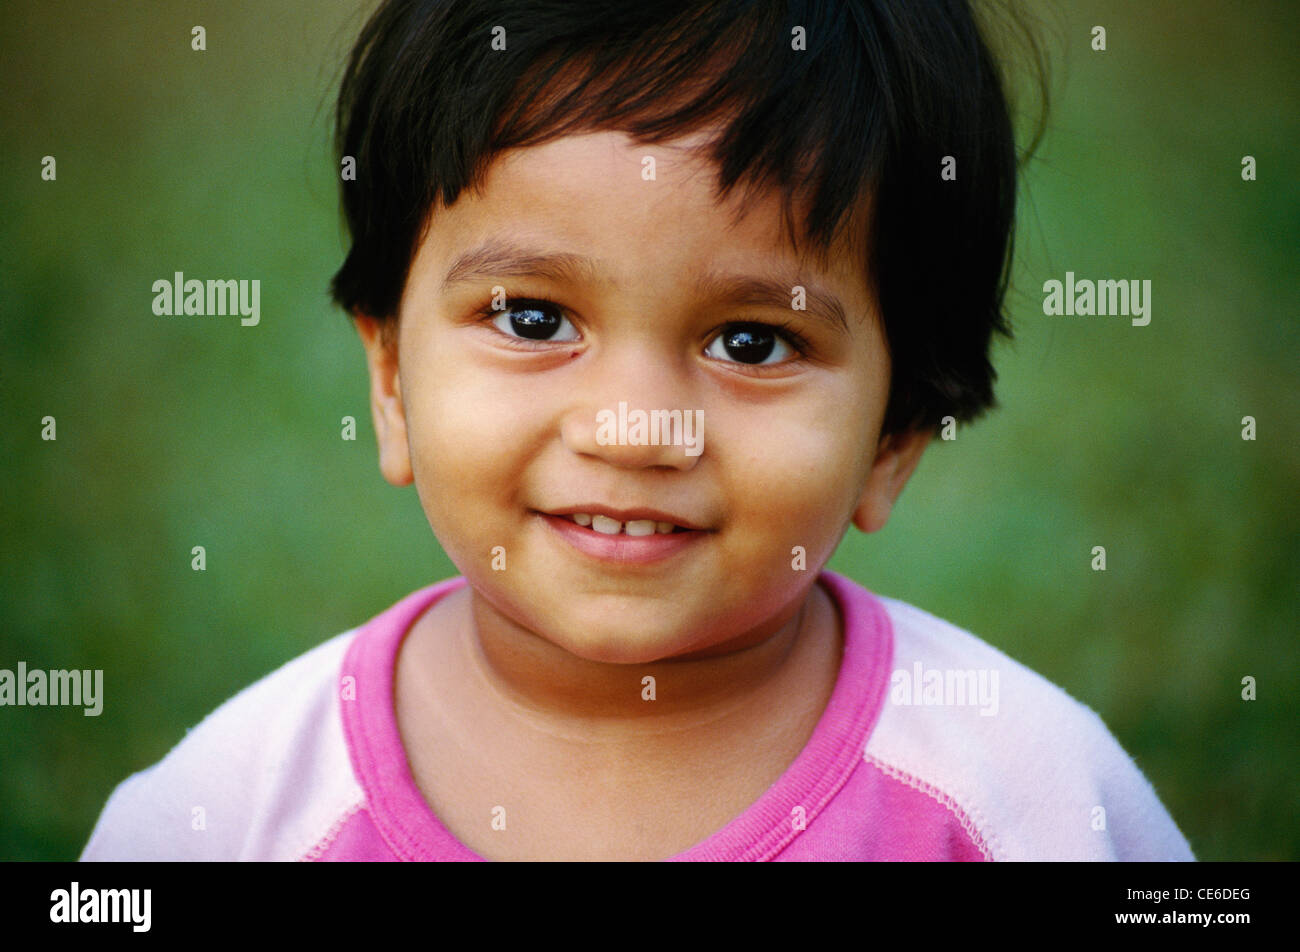 small young baby girl loooking at camera   Model Released Stock Photo